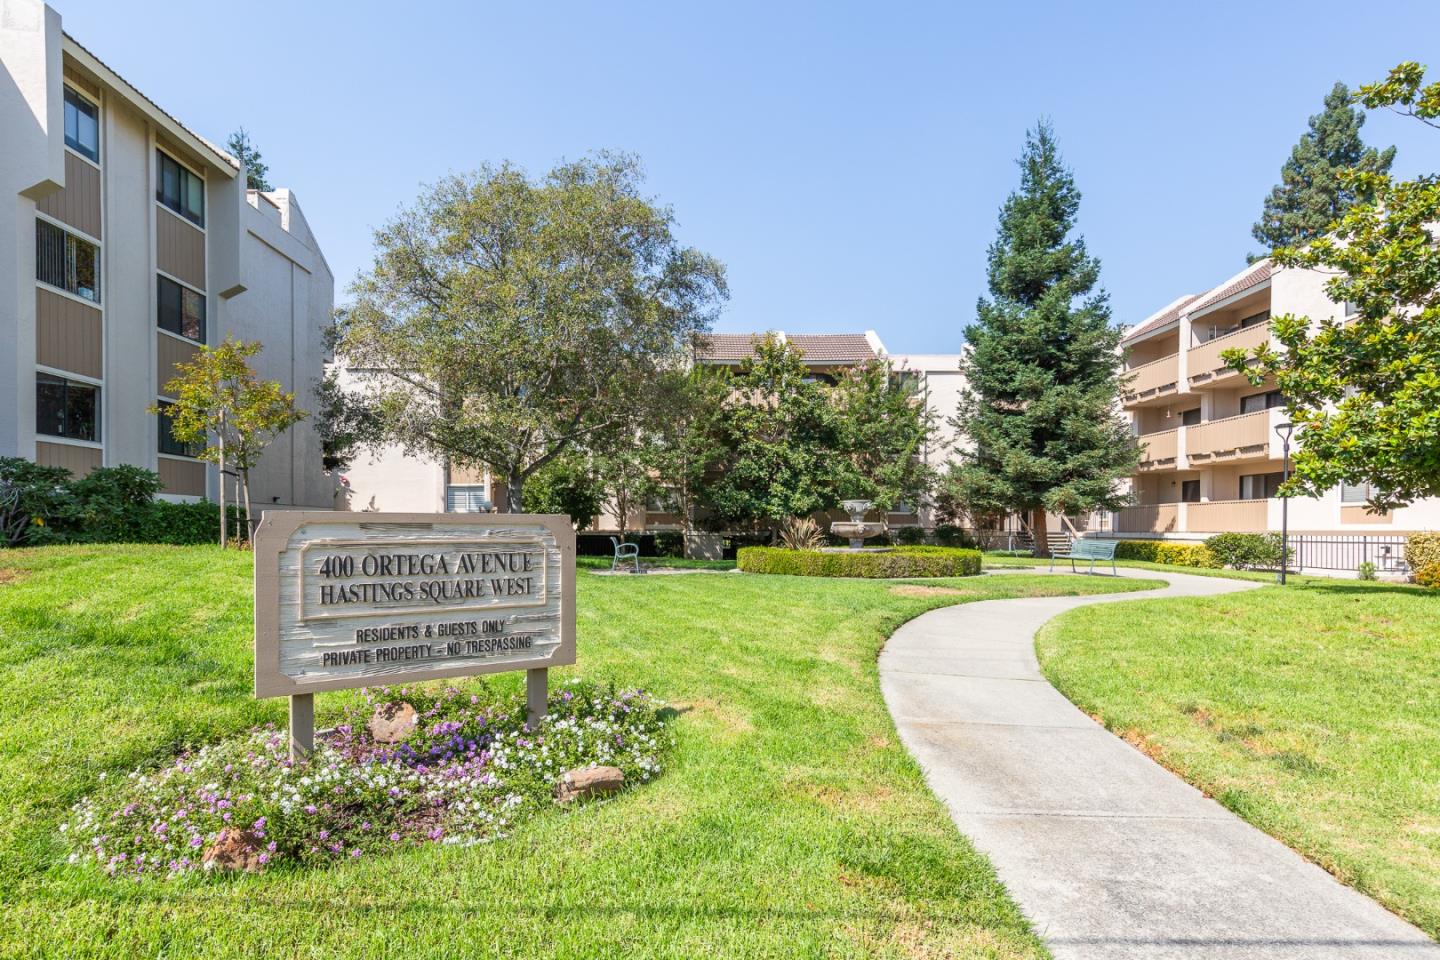 Midway between downtown Los Altos and downtown Mountain View, this Light & Airy 2 bedroom, 1 bath top-floor condo has penthouse views!  Spacious, south-facing balcony.  Remodeled kitchen with SS appliances, shaker cabinets, and composite granite countertops.  Remodeled bathroom with new tub/shower and tiled surround.  Gas Fireplace * New Carpeting * Recessed Lighting * Extra Storage * Double Pane Windows & Patio Door * Fresh Paint * Walk-In Closet * Elevator to all Floors & Garage * Secure Garage with Electronic Gate * Ample Guest Parking * Separately controlled Electric Heat  * Community Pool & Clubhouse * Close Walk to Caltrain and San Antonio Shopping, Entertainment, & Restaurants * Los Altos Schools:  Almond Elem, Egan Middle, & Los Altos High